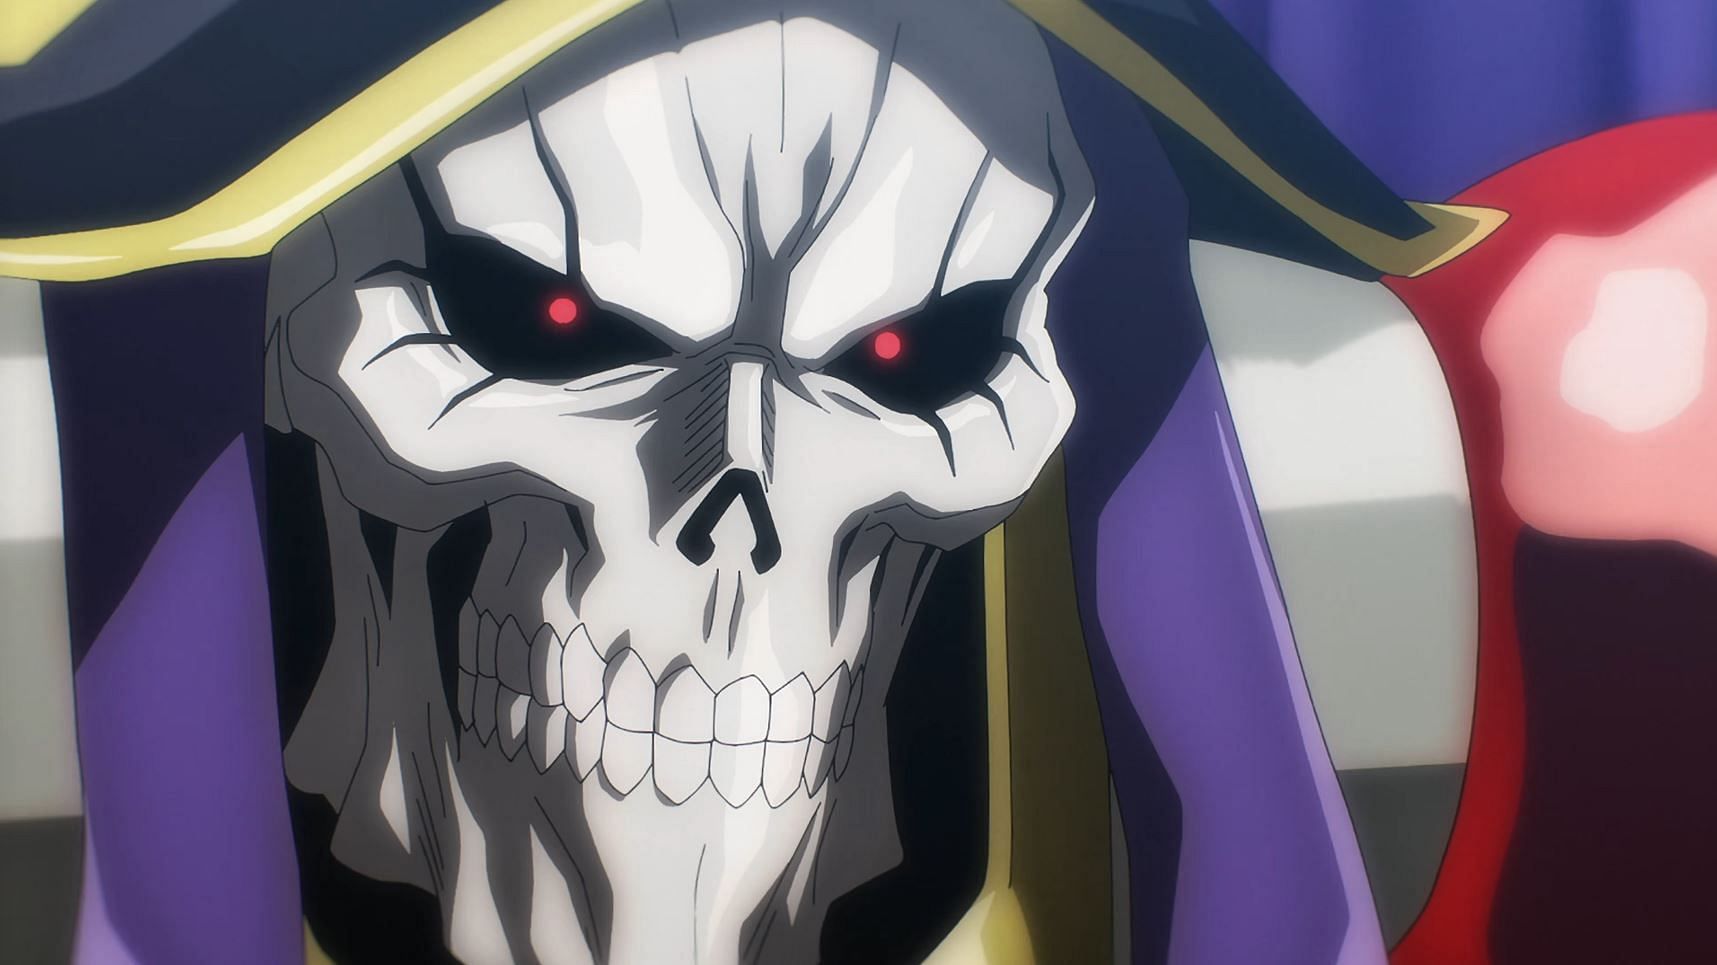 Overlord Season 4 Episode 3 Release Date & Time